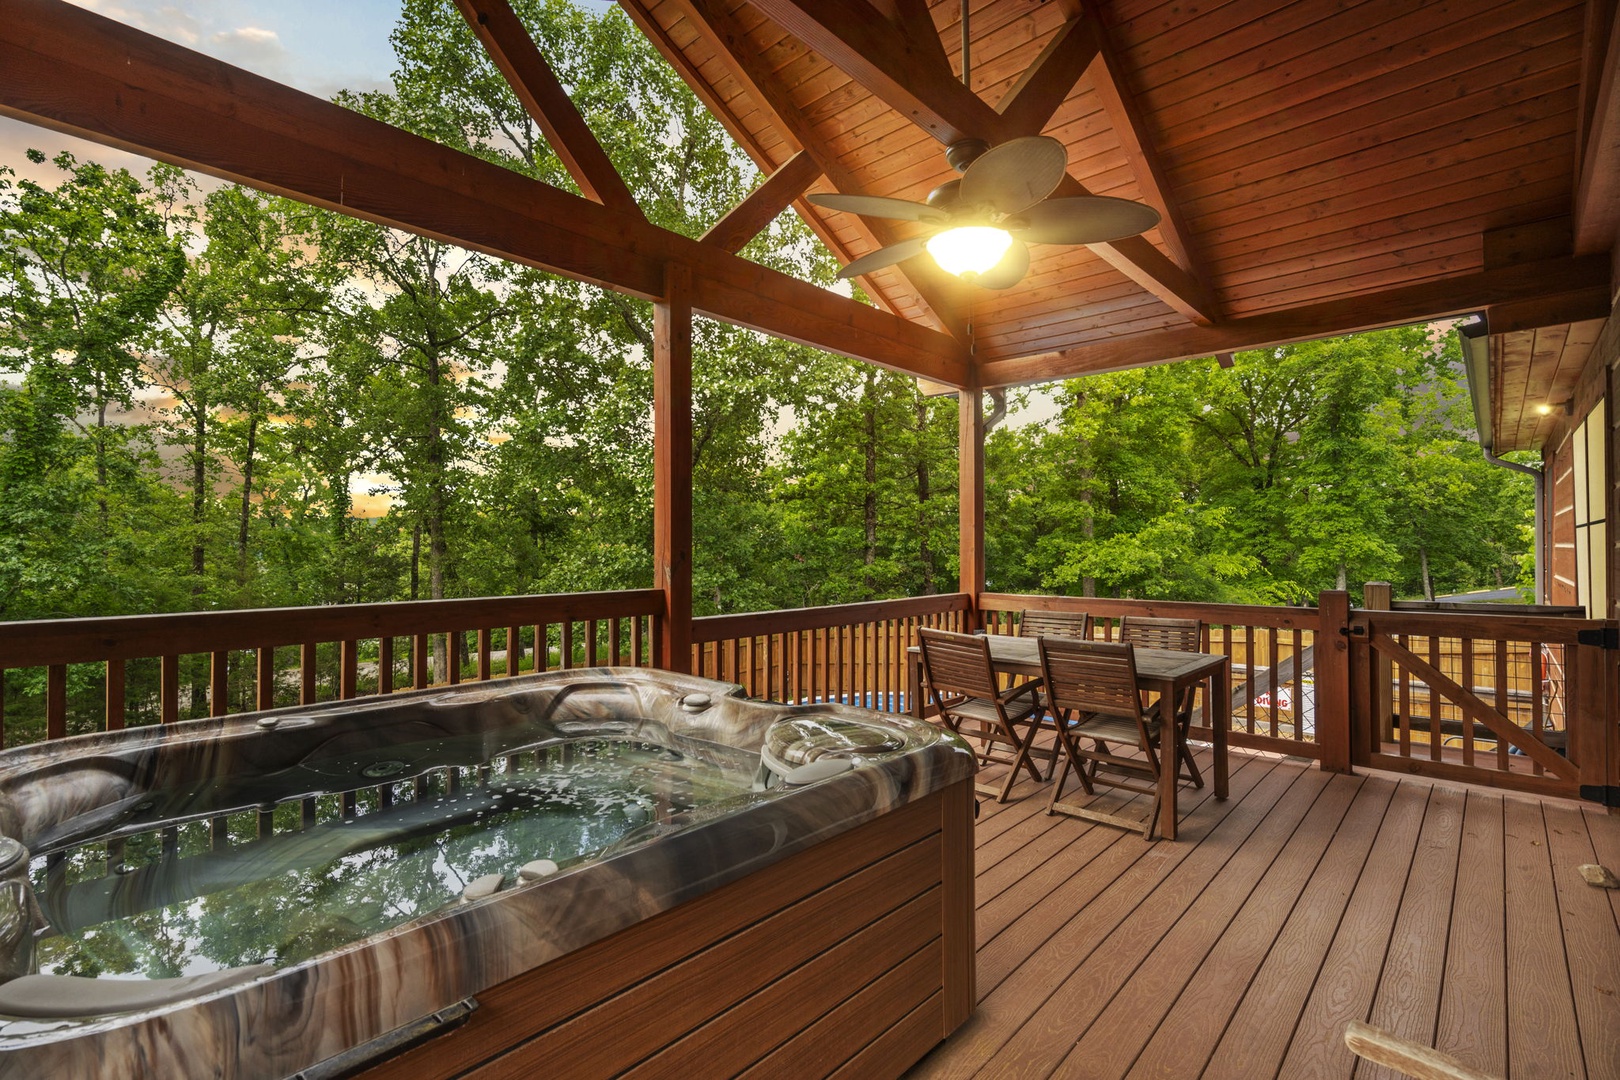 Indulge in the seclusion of the private hot tub